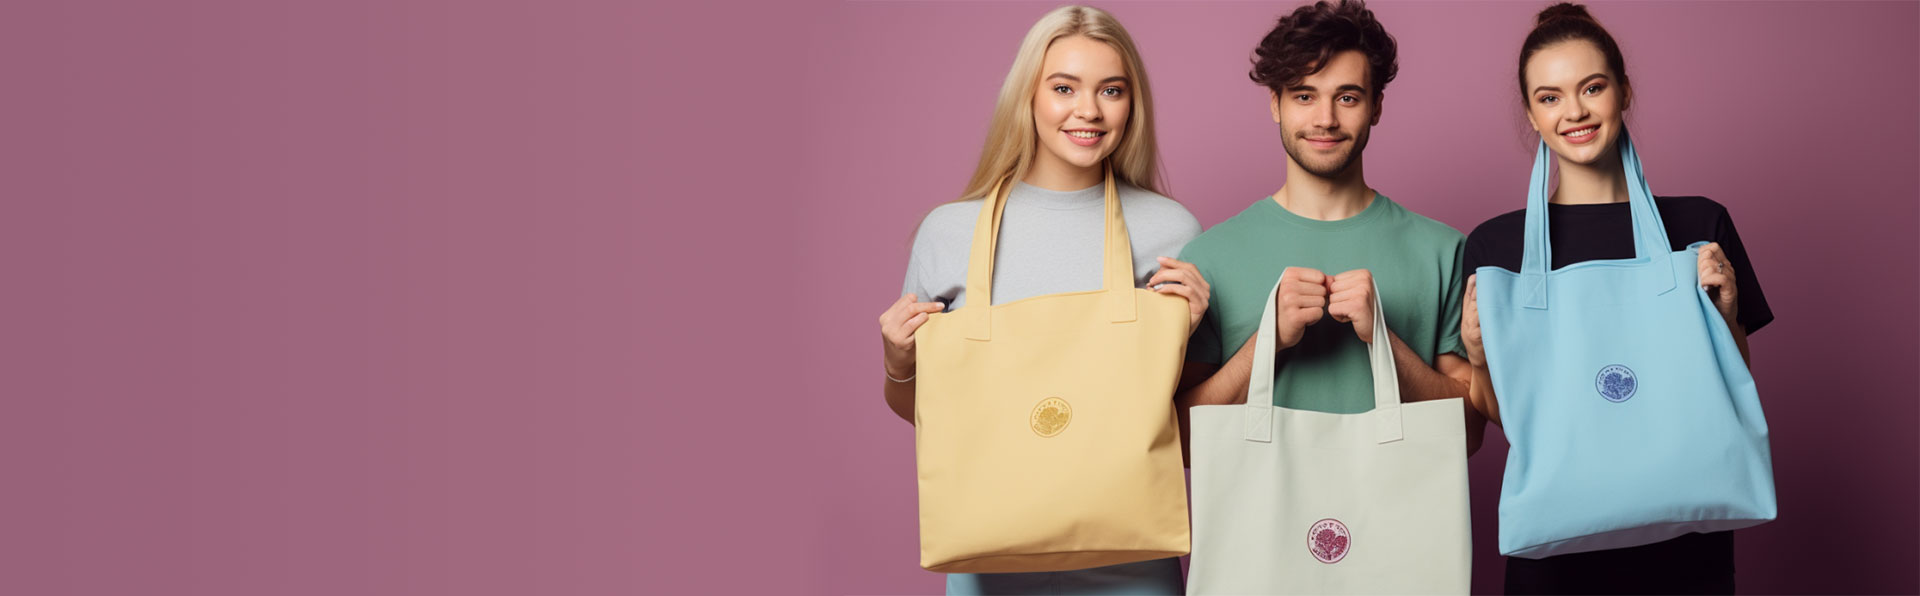 Tote Bags banner